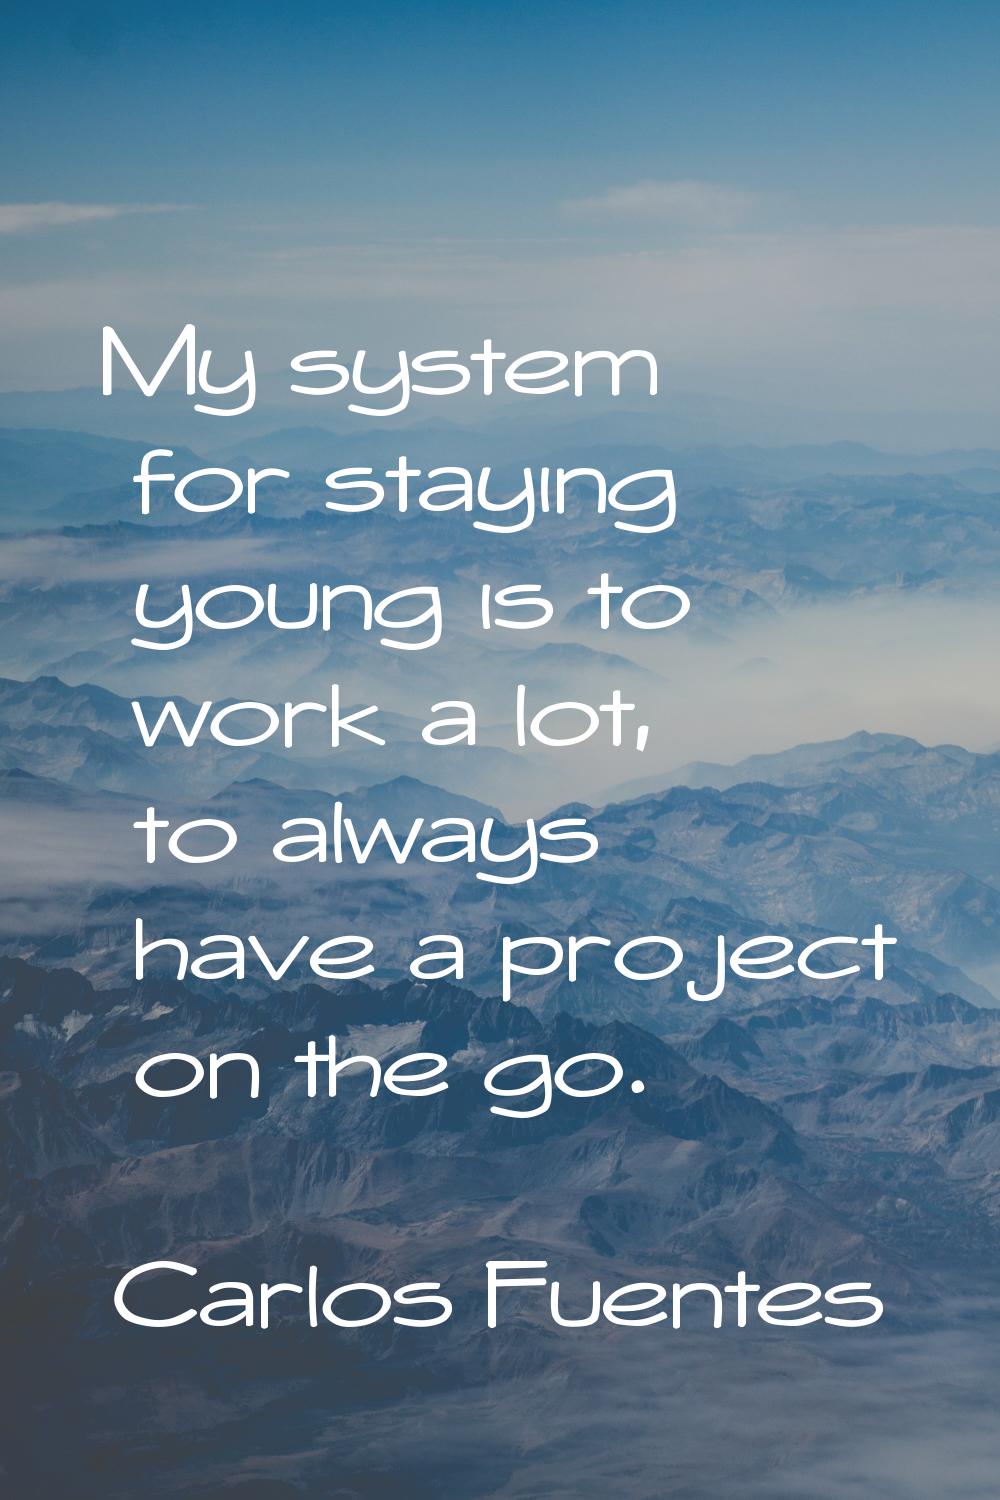 My system for staying young is to work a lot, to always have a project on the go.